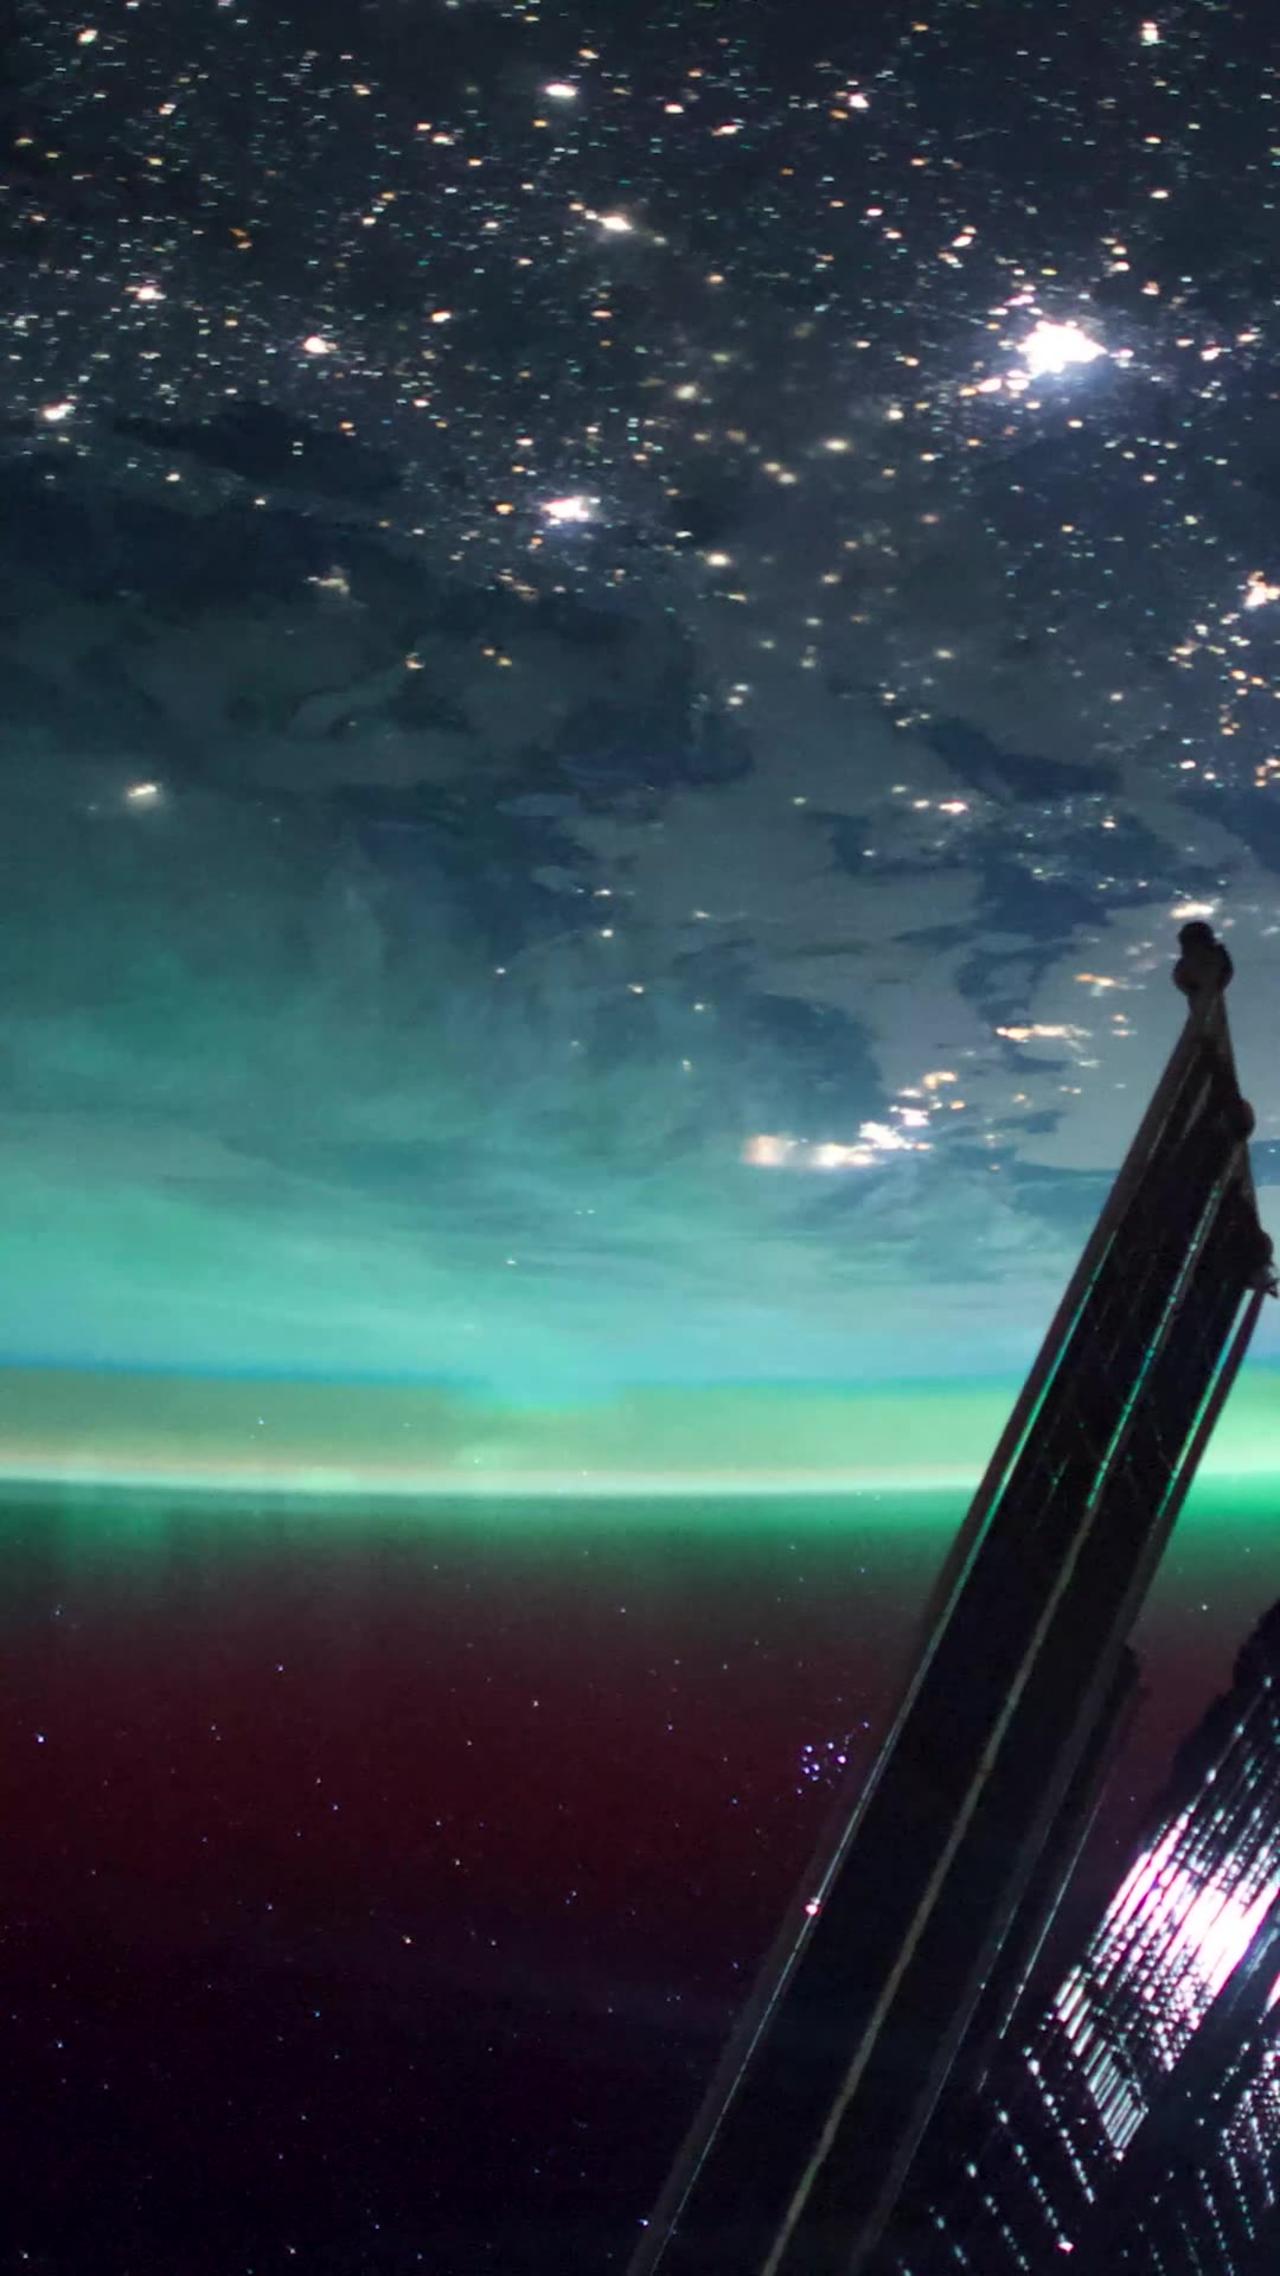 Northern Lights Seen From the International Space Station